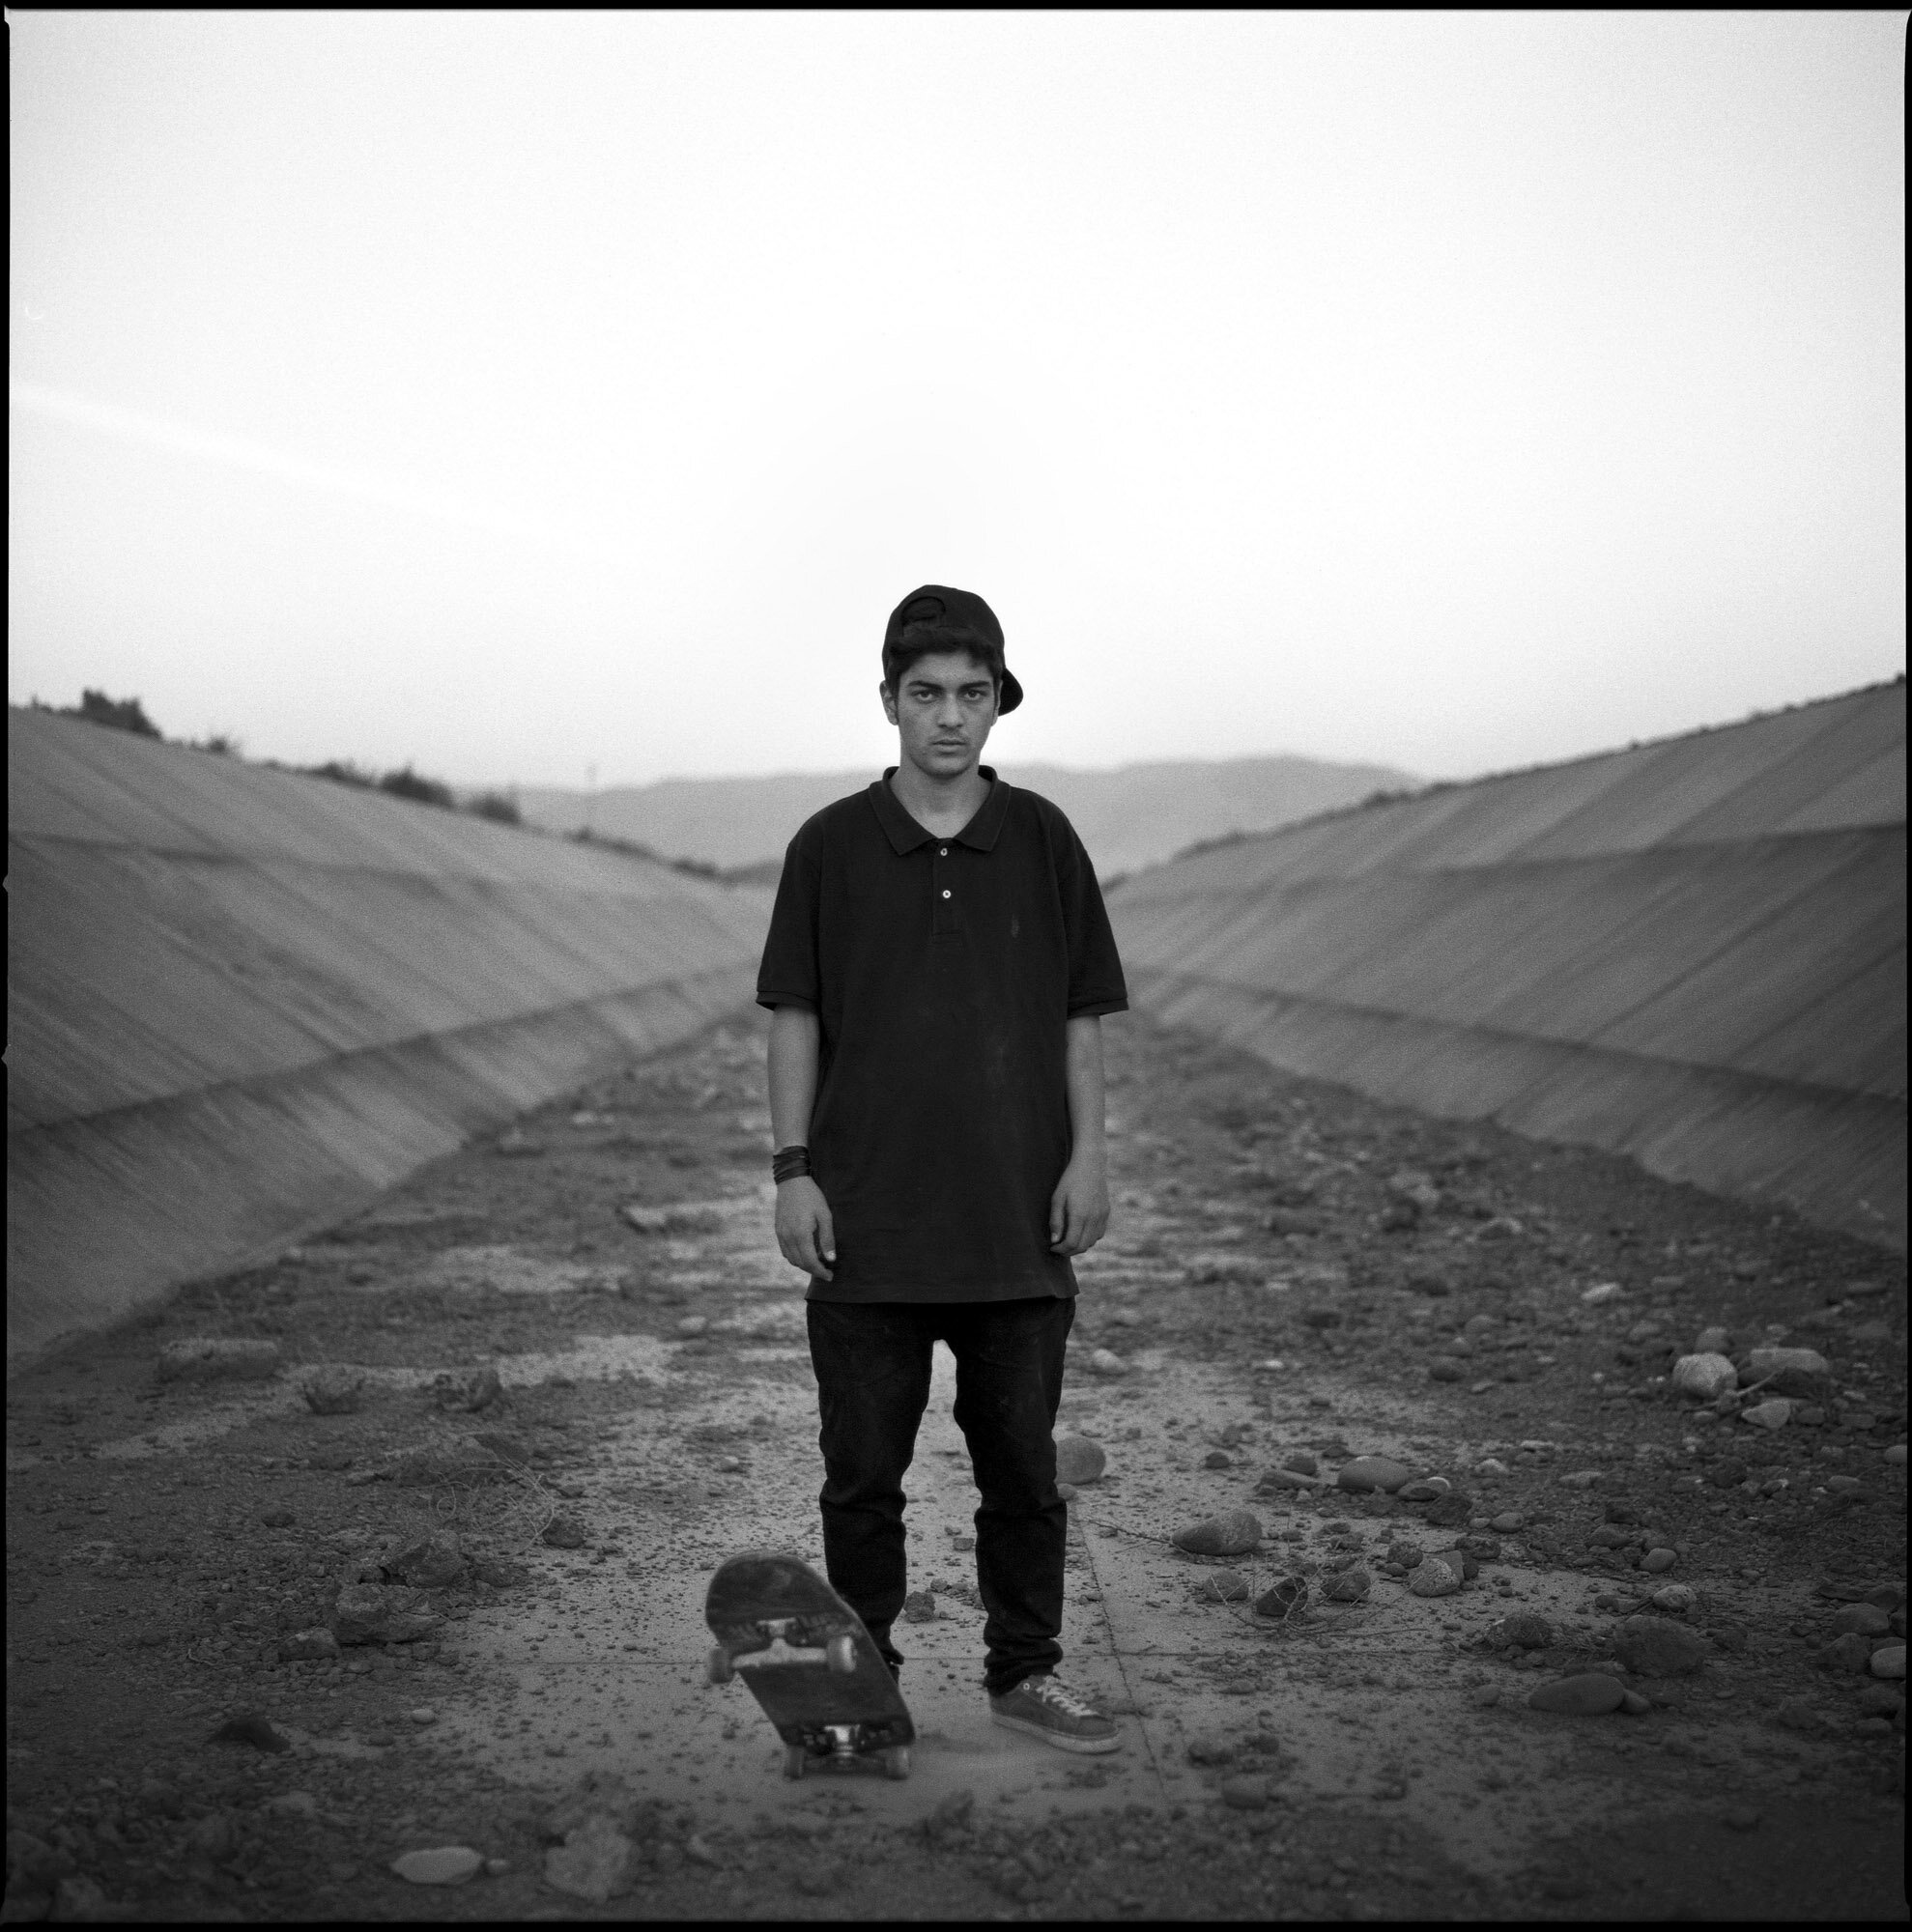  Mahdi, 16 years old, skateboarder from Tabriz, in a ditch on the outskirts of the city. Tabriz, Iran, October 21, 2015. 